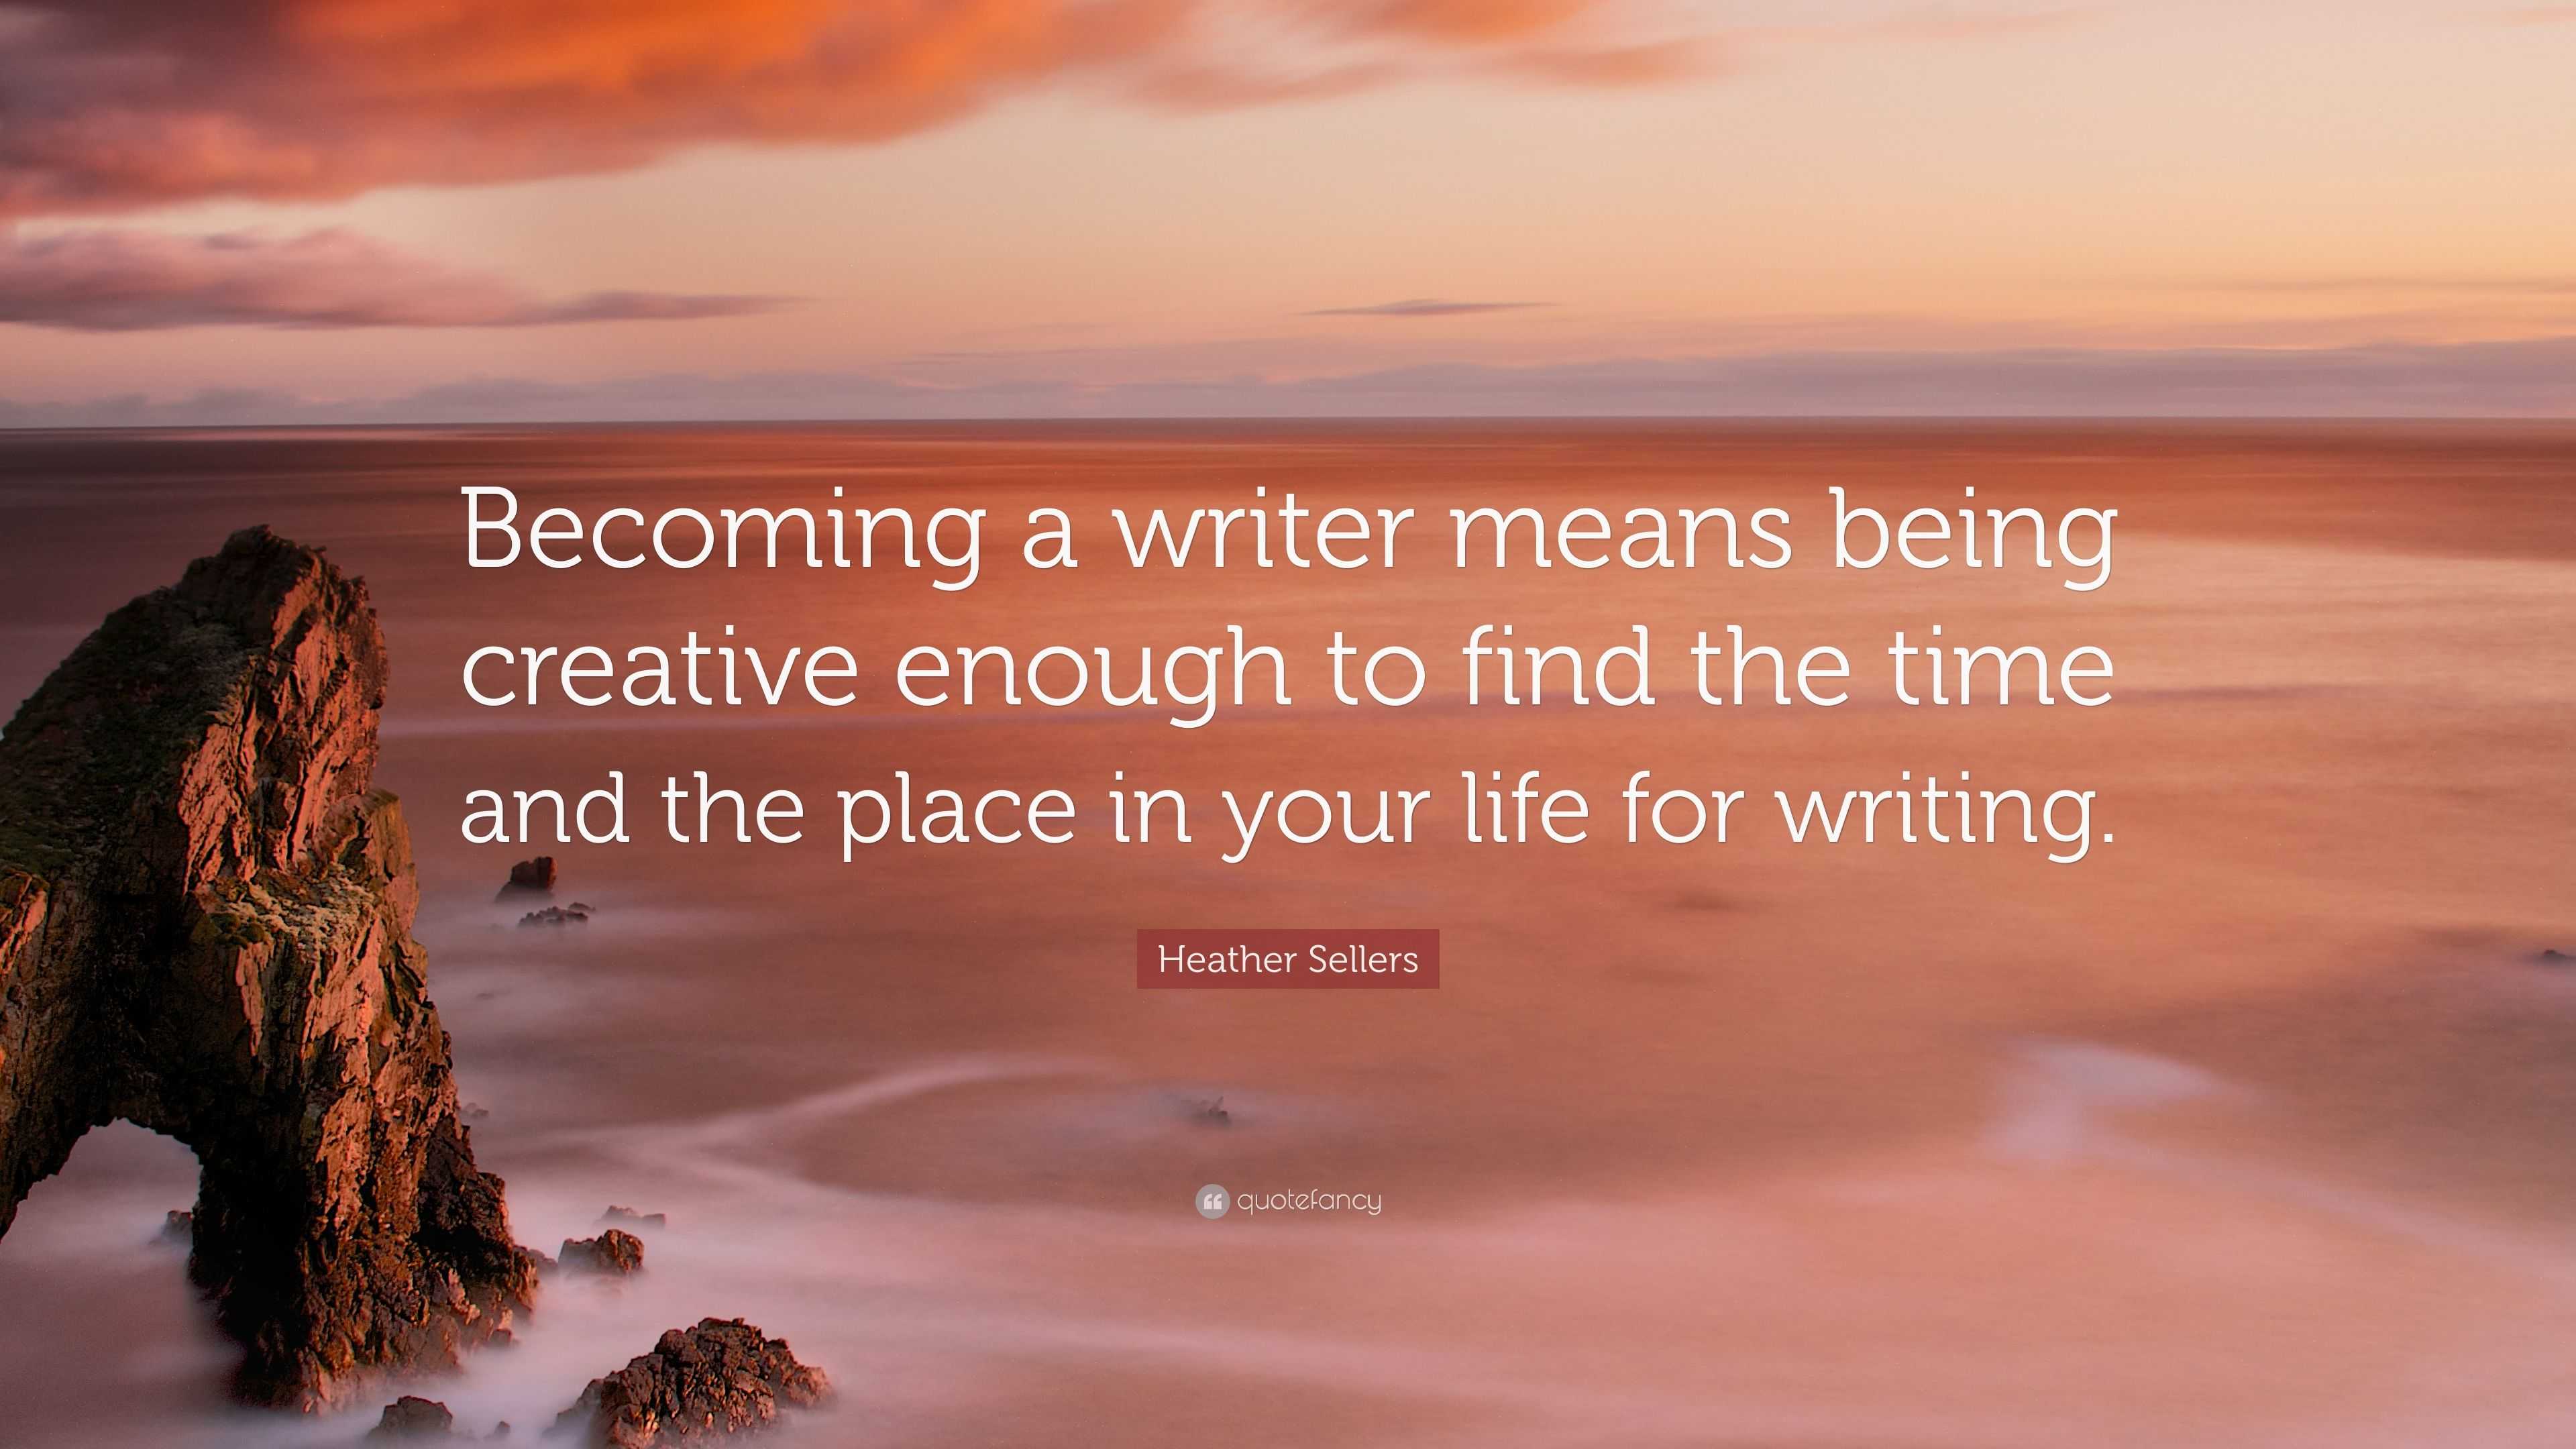 creative writing quotes dreaming